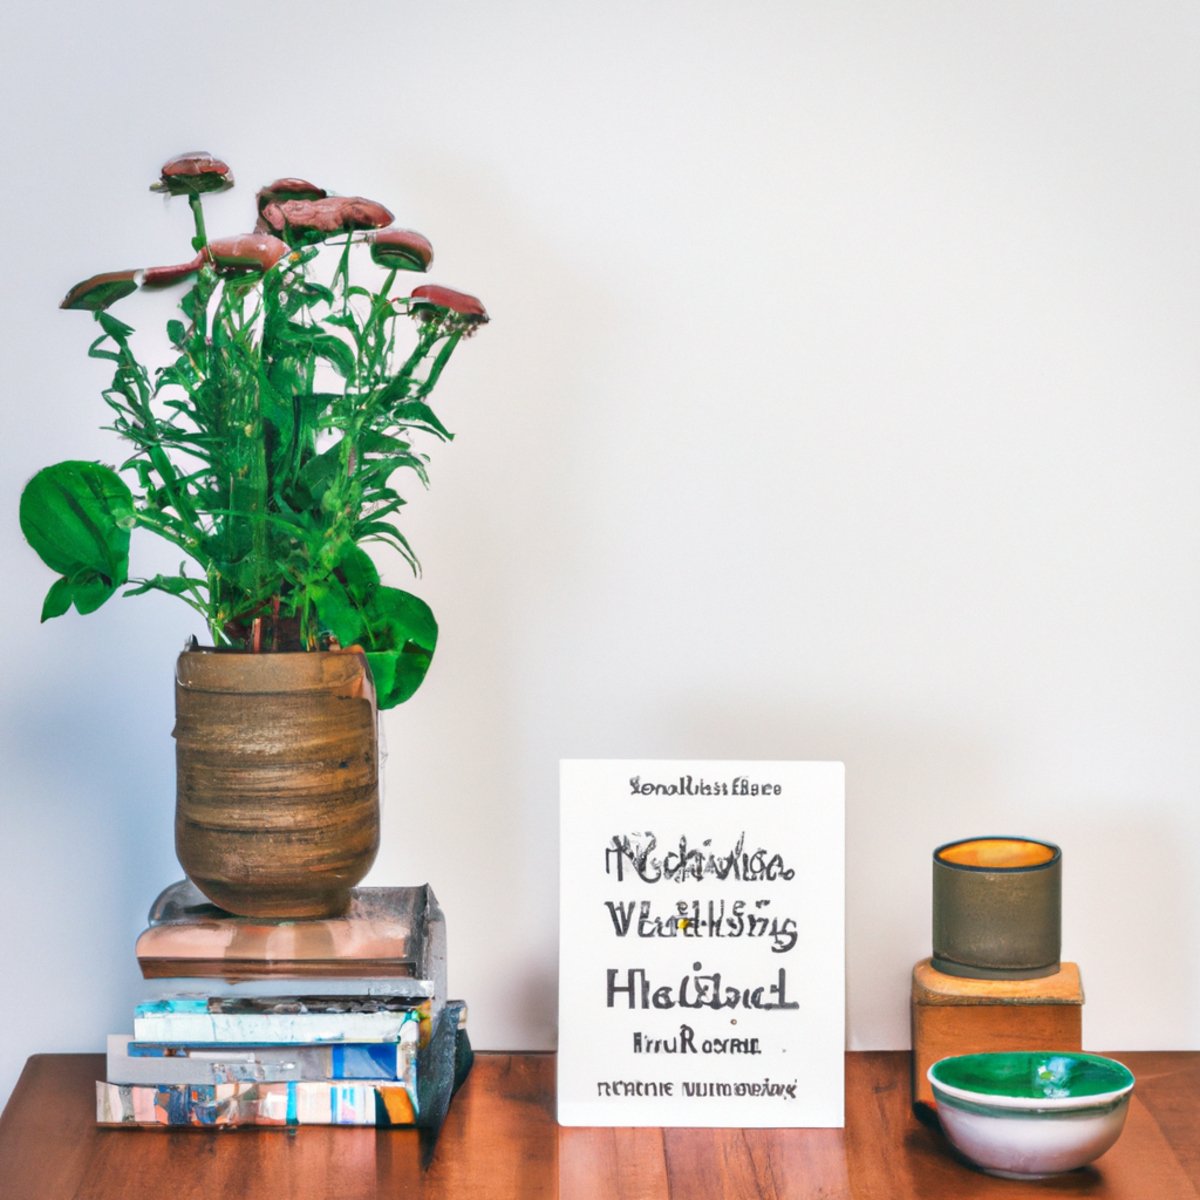 A serene scene with a green plant, books, tea, and journal, promoting mindfulness, self-care, and positive thinking.